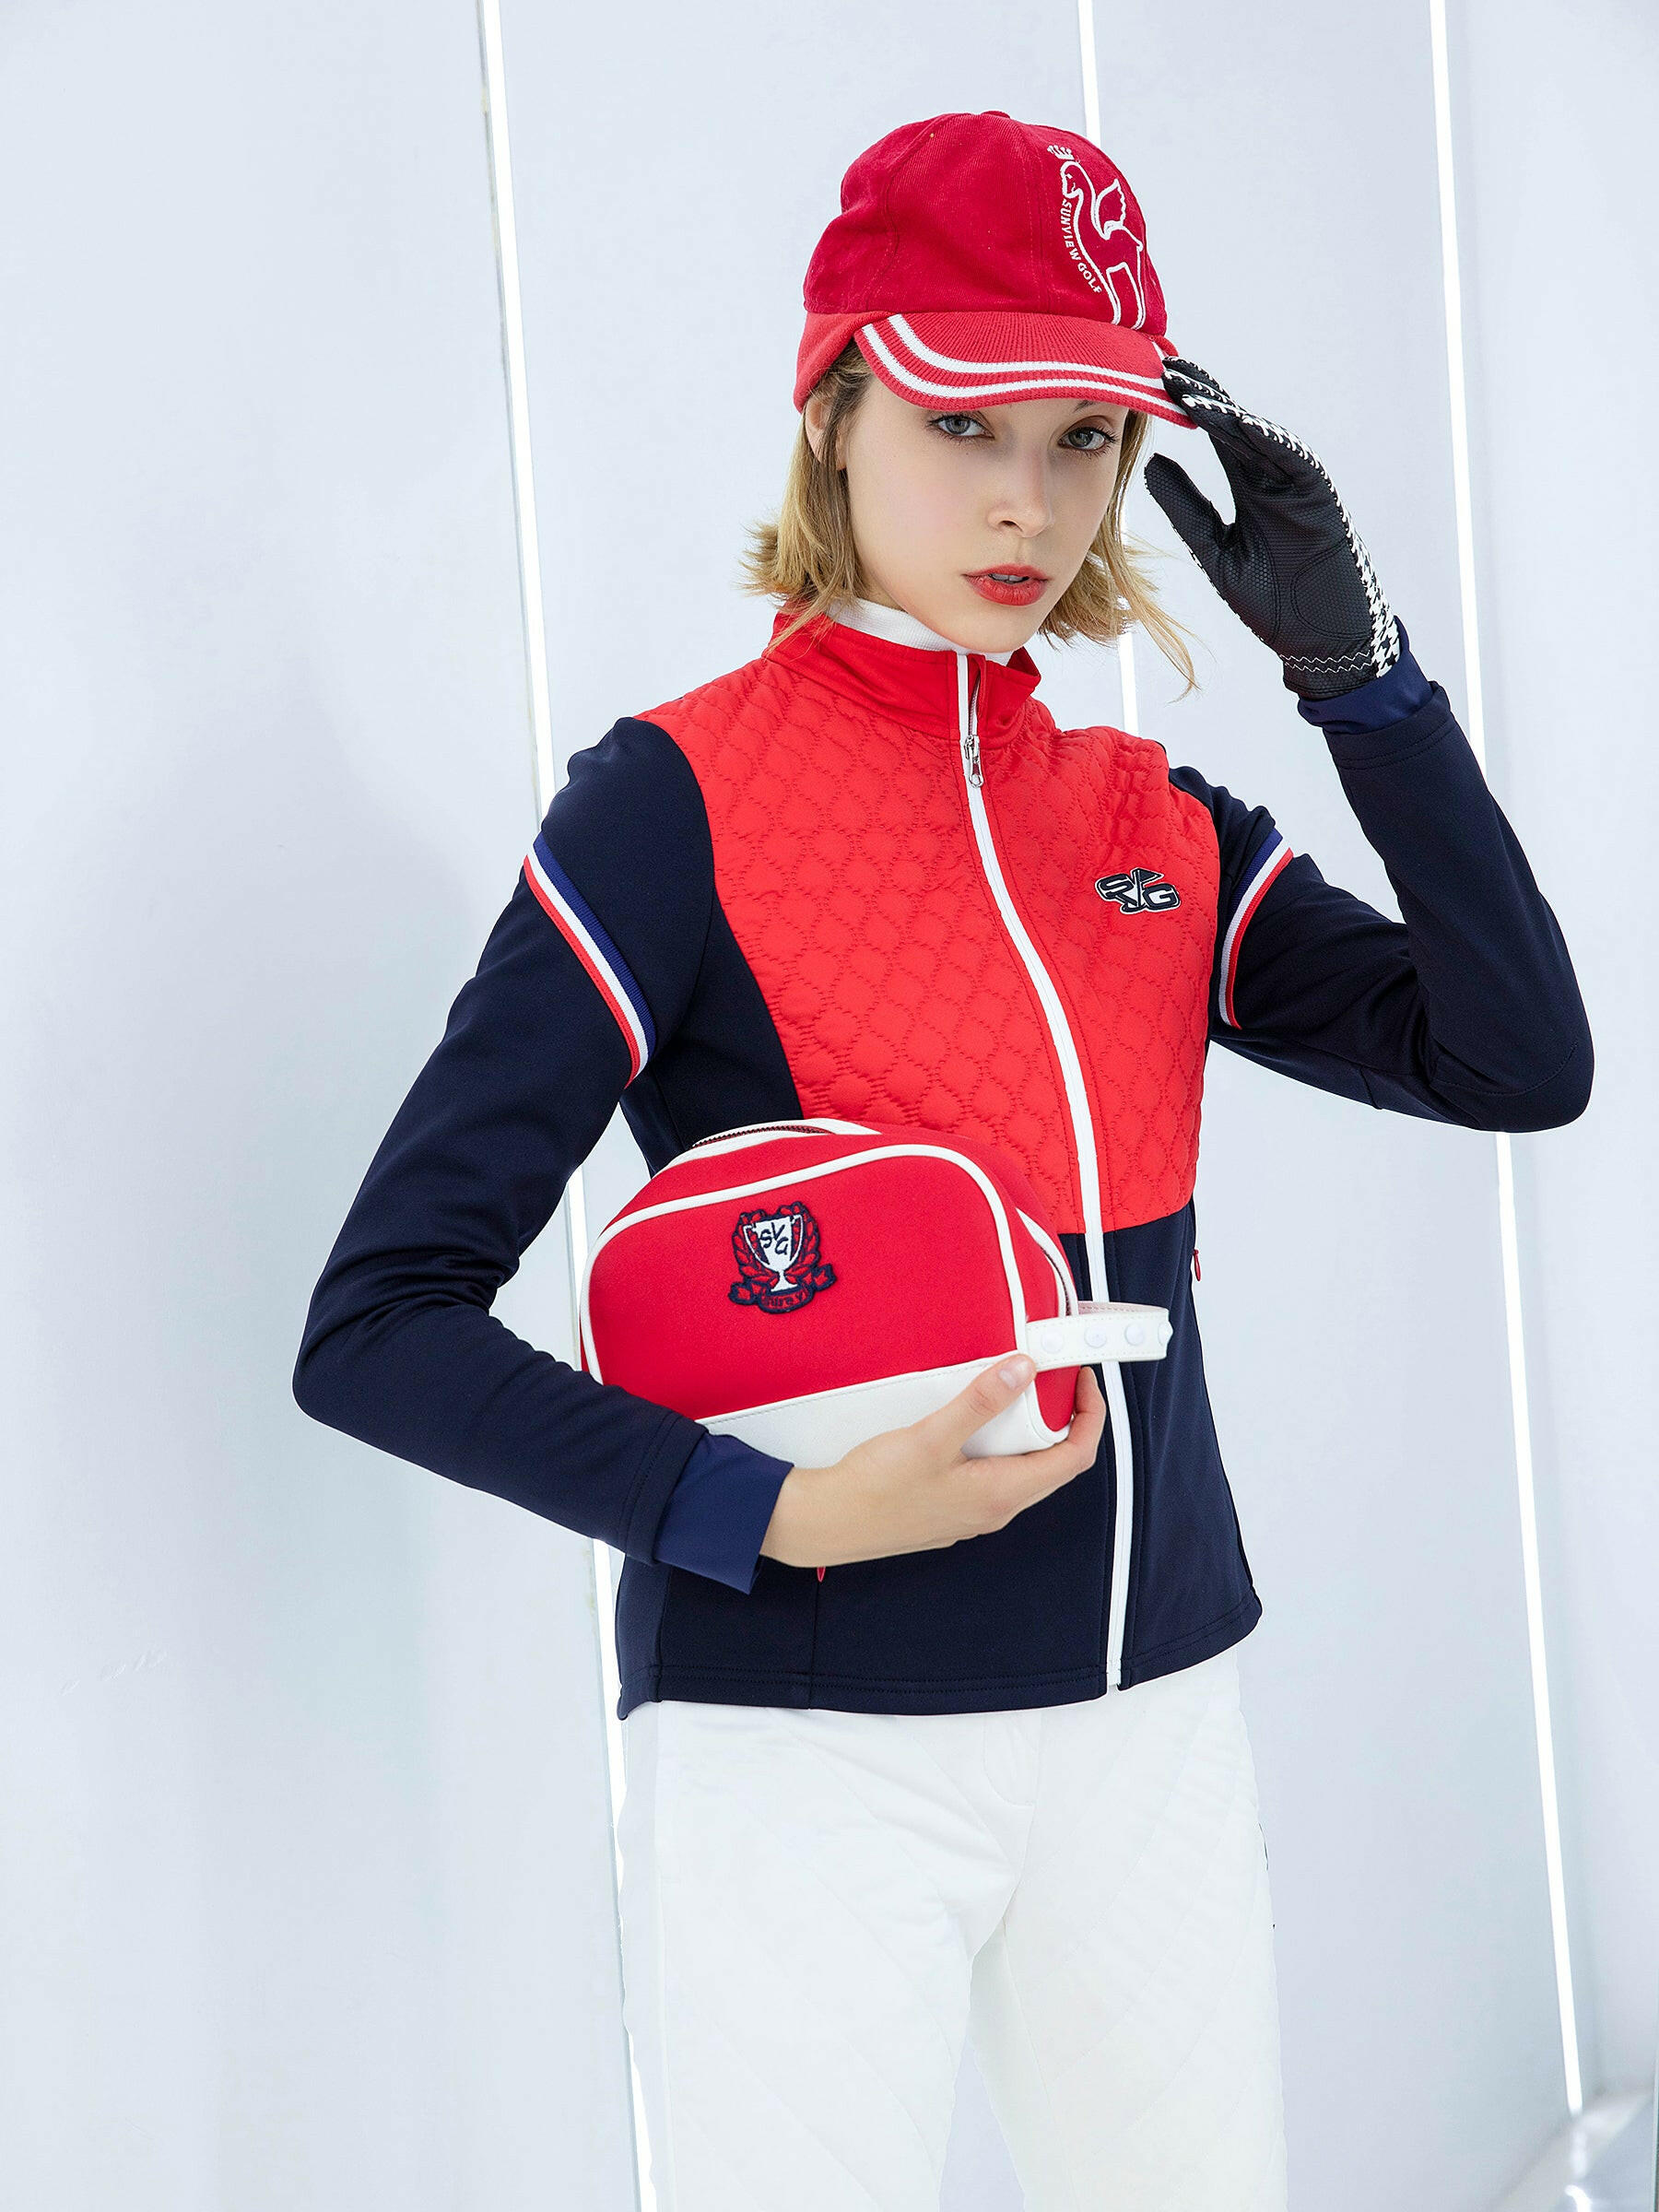 Women's padded zip-up jacket, in navy and red color blocking.